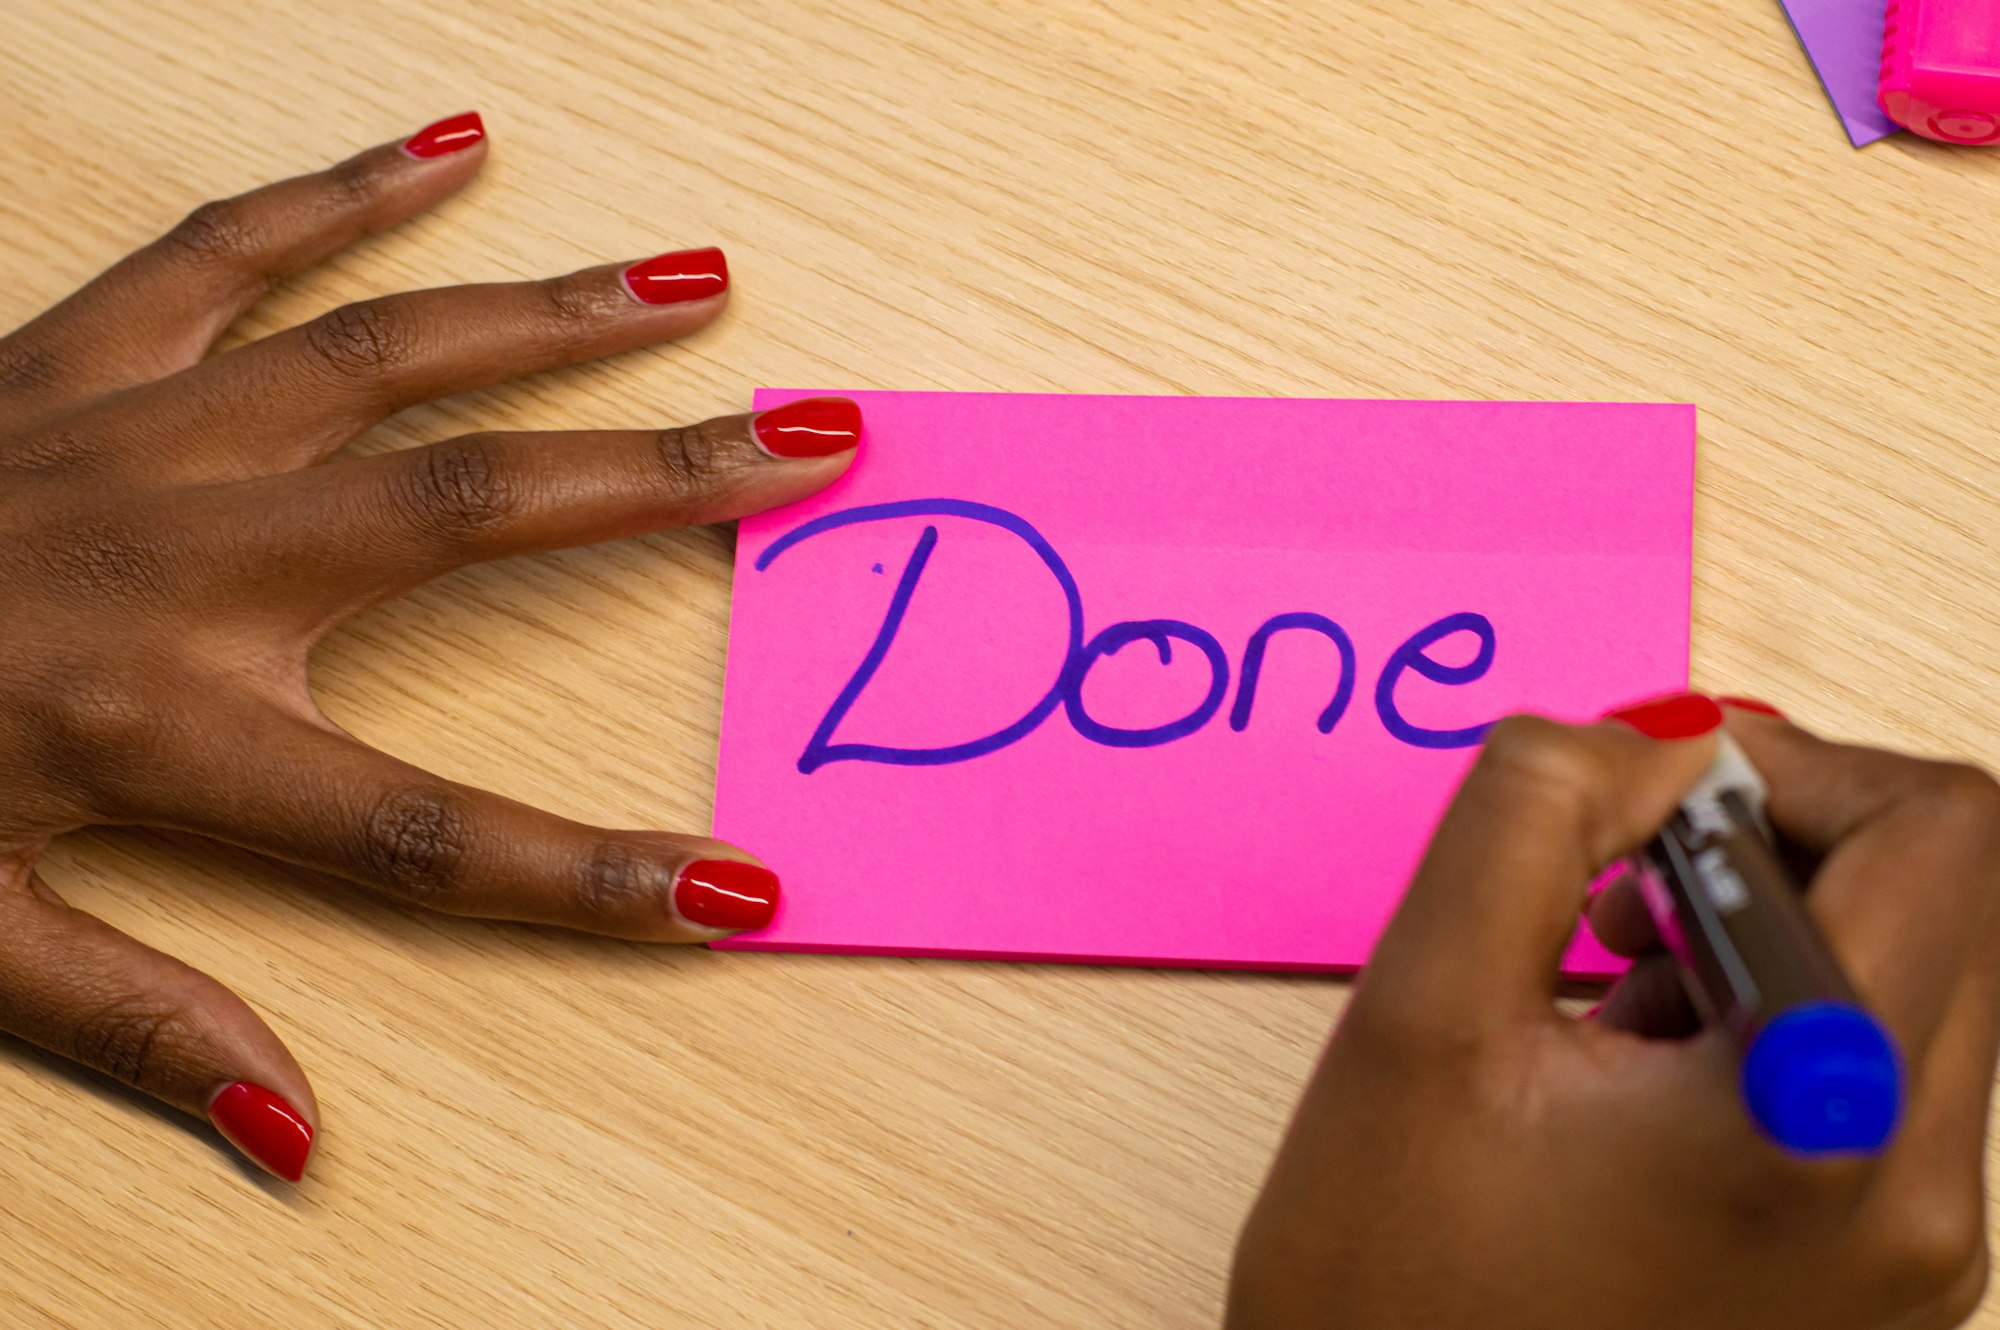 Project Management Knowledge: the Definition of Done